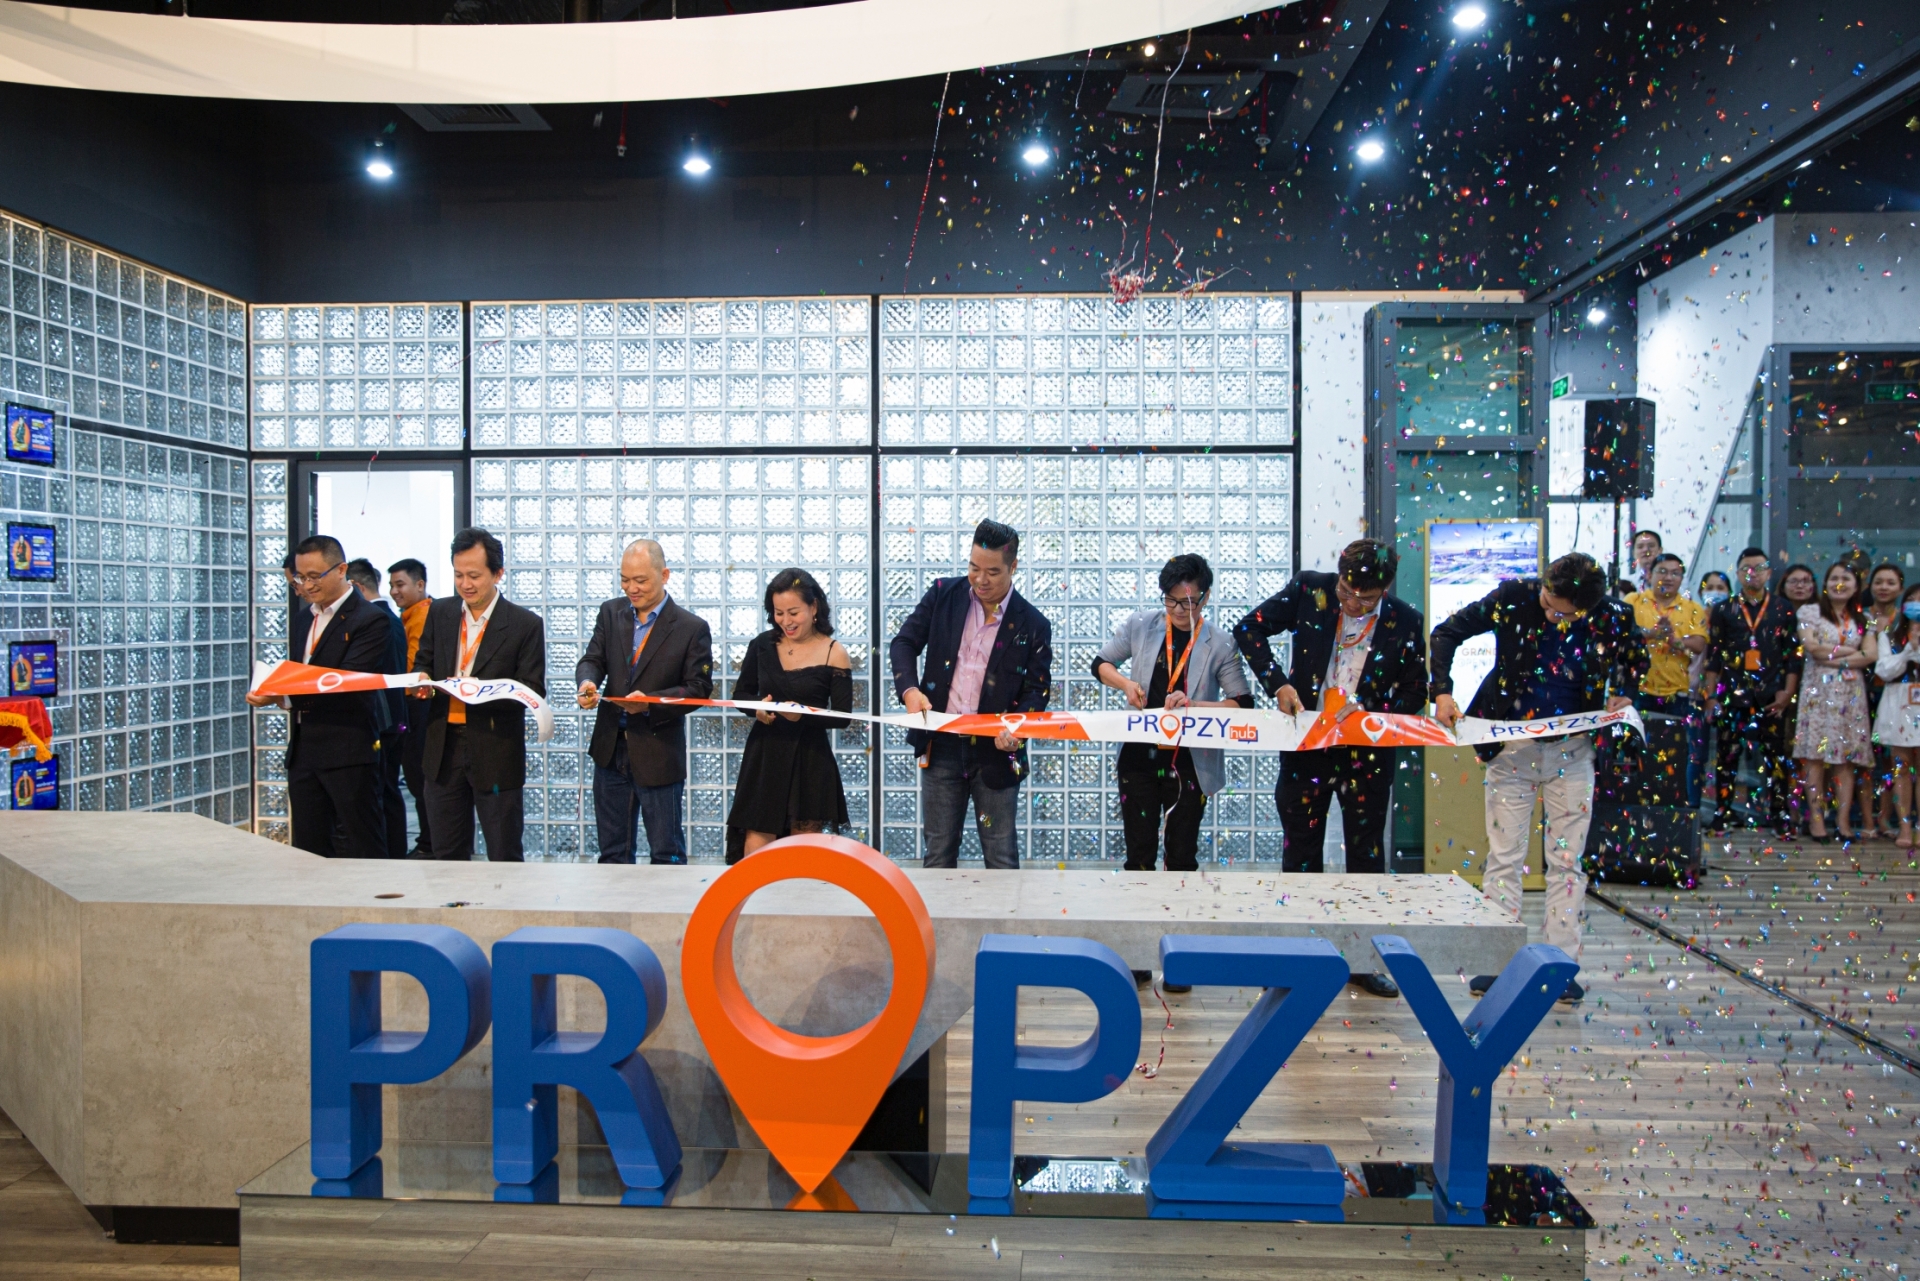 Propzy seeks to raise $50 million in Series B